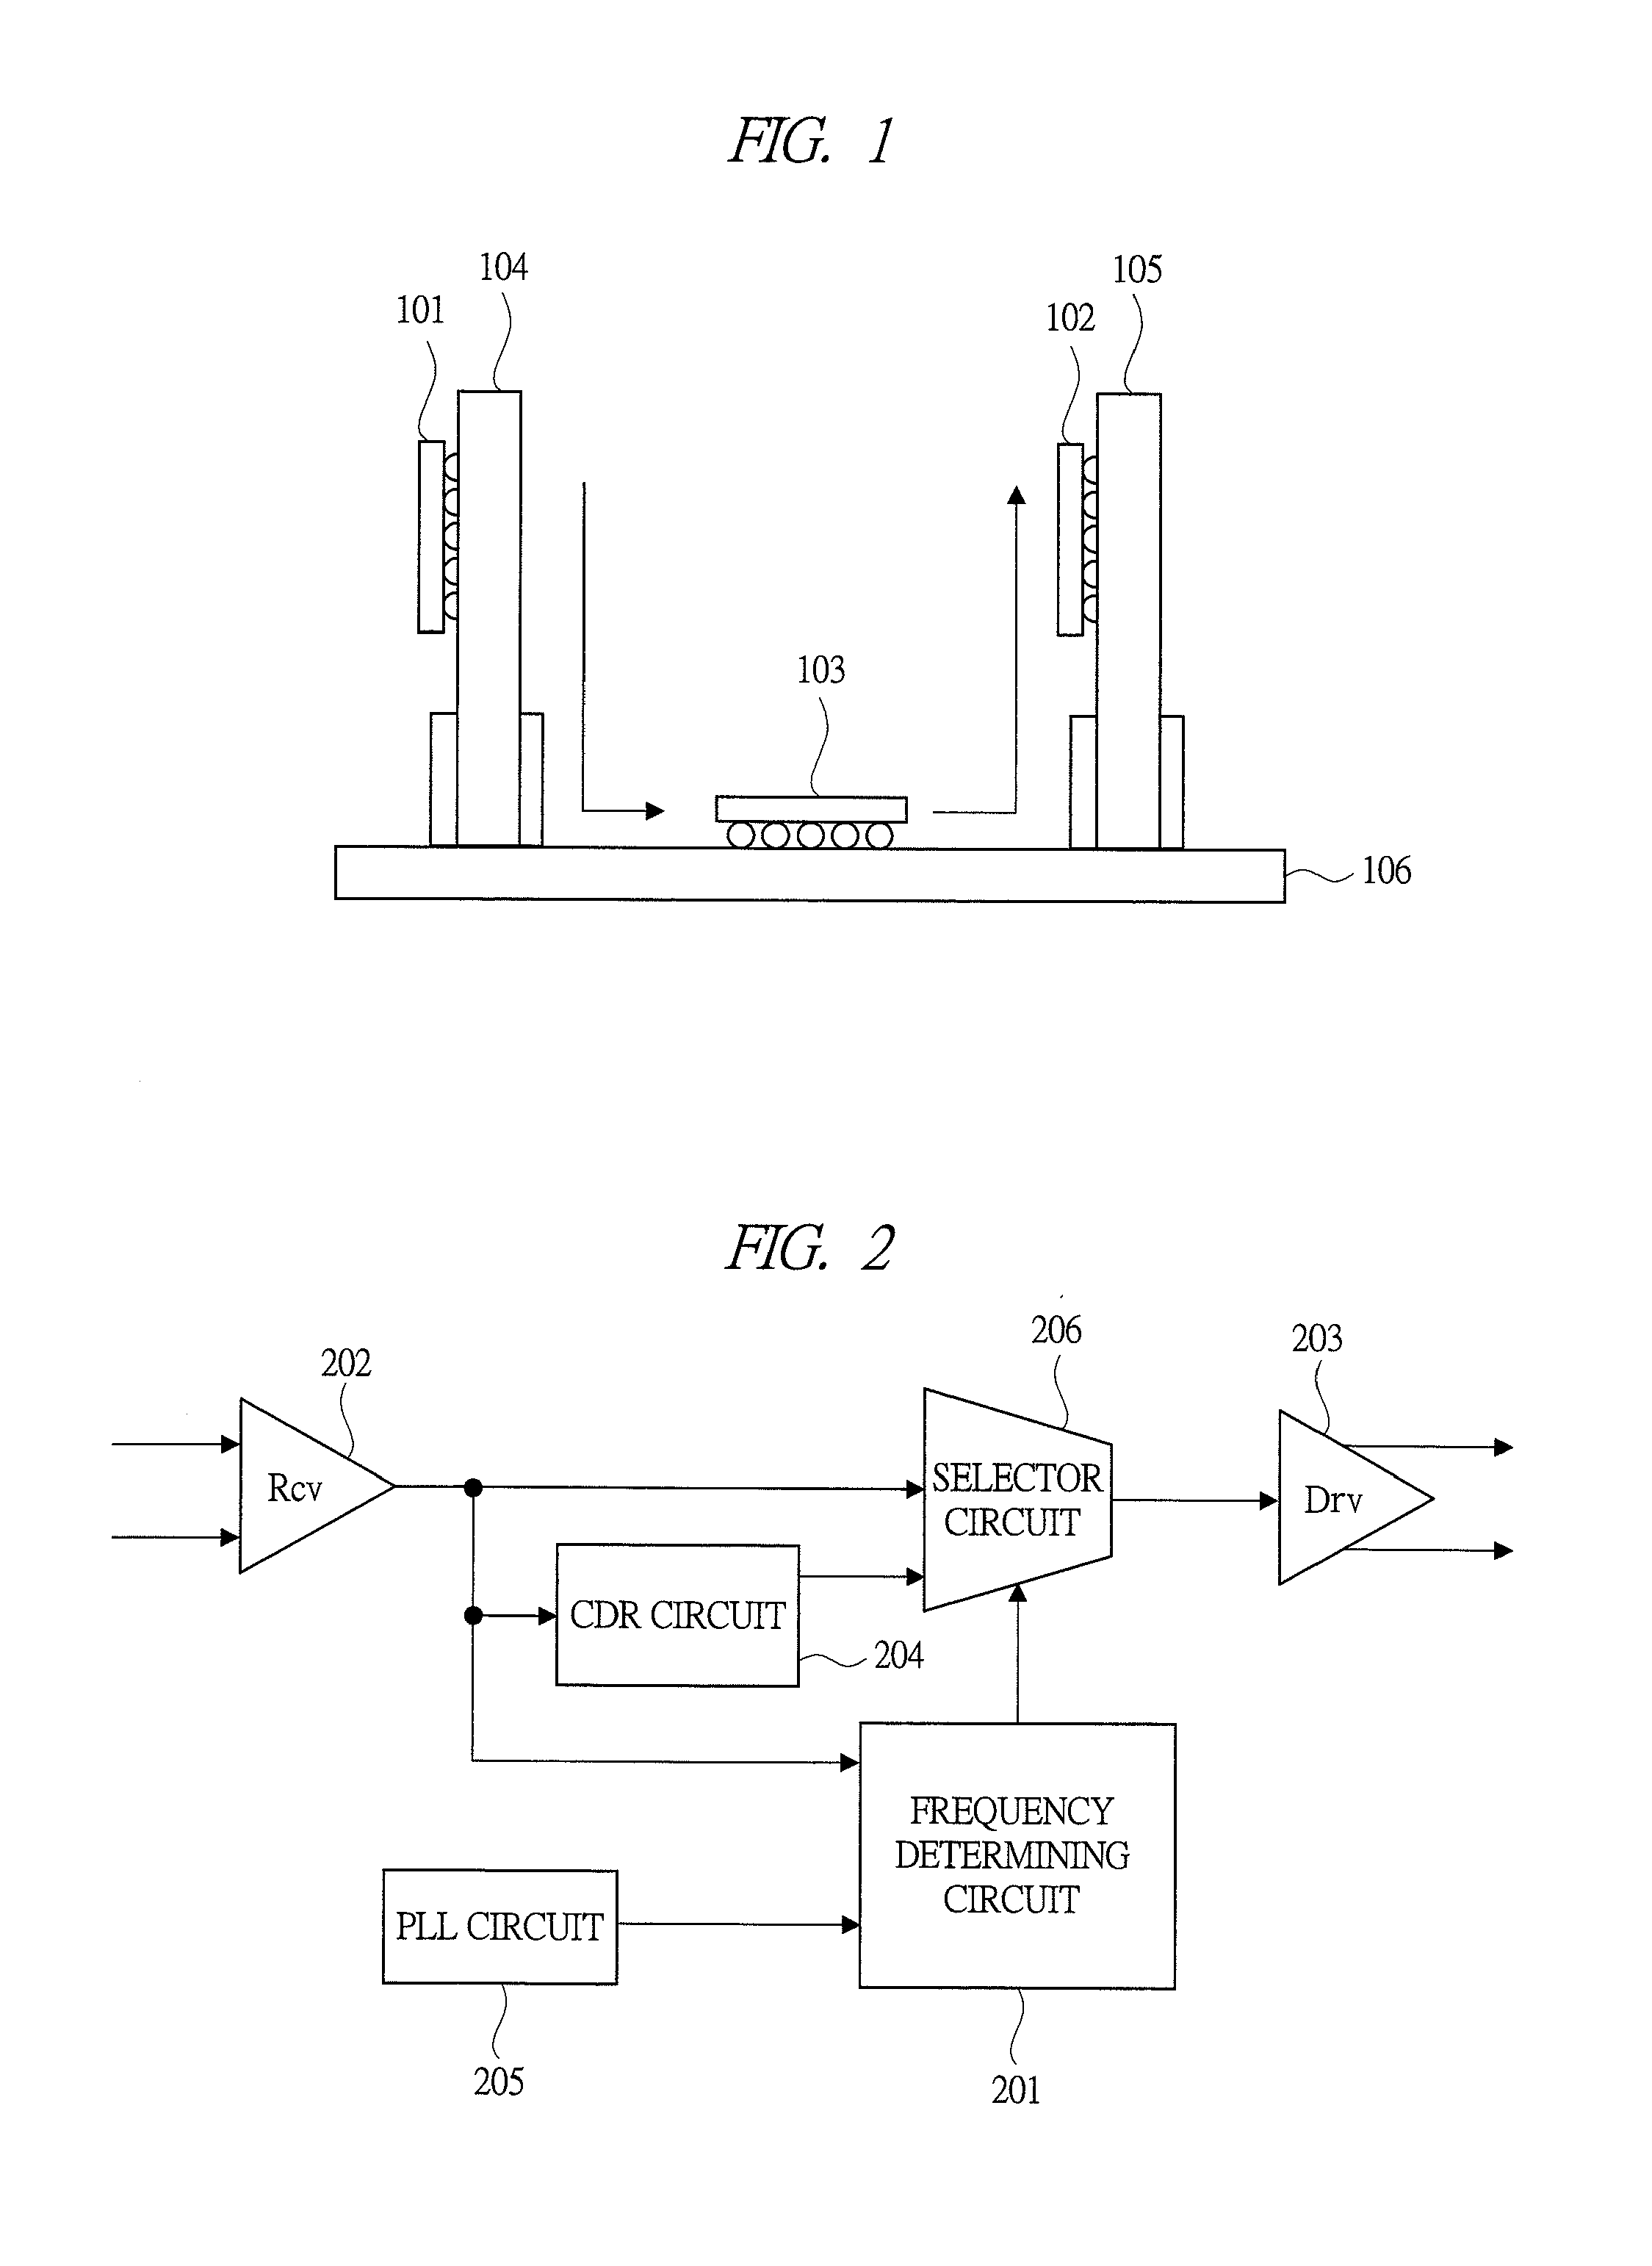 Frequency determining circuit and semiconductor device